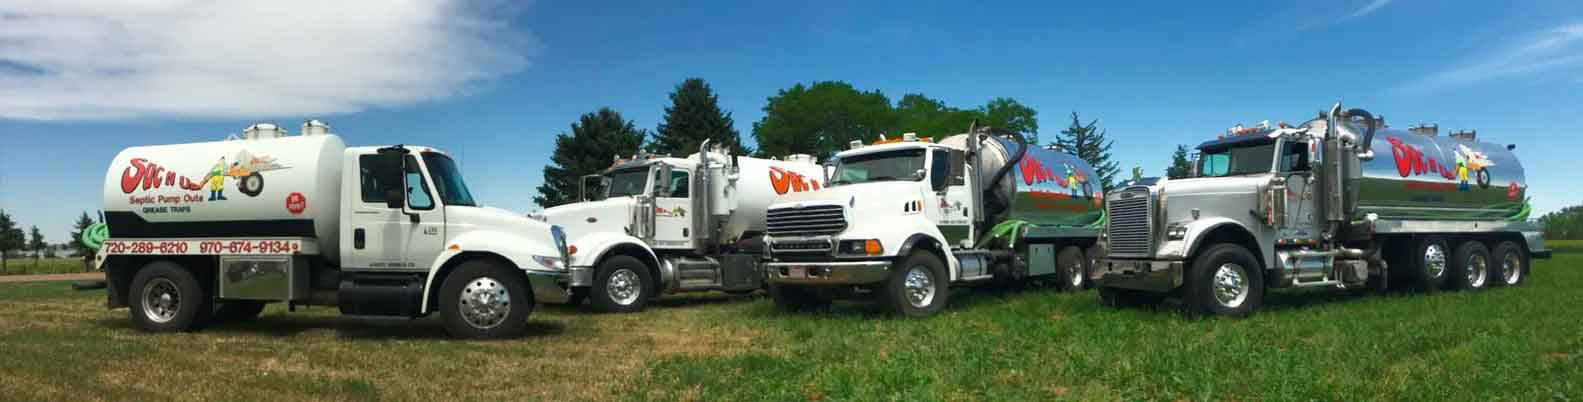 Suc-n-Up-Septic-Grease-Trap-Services